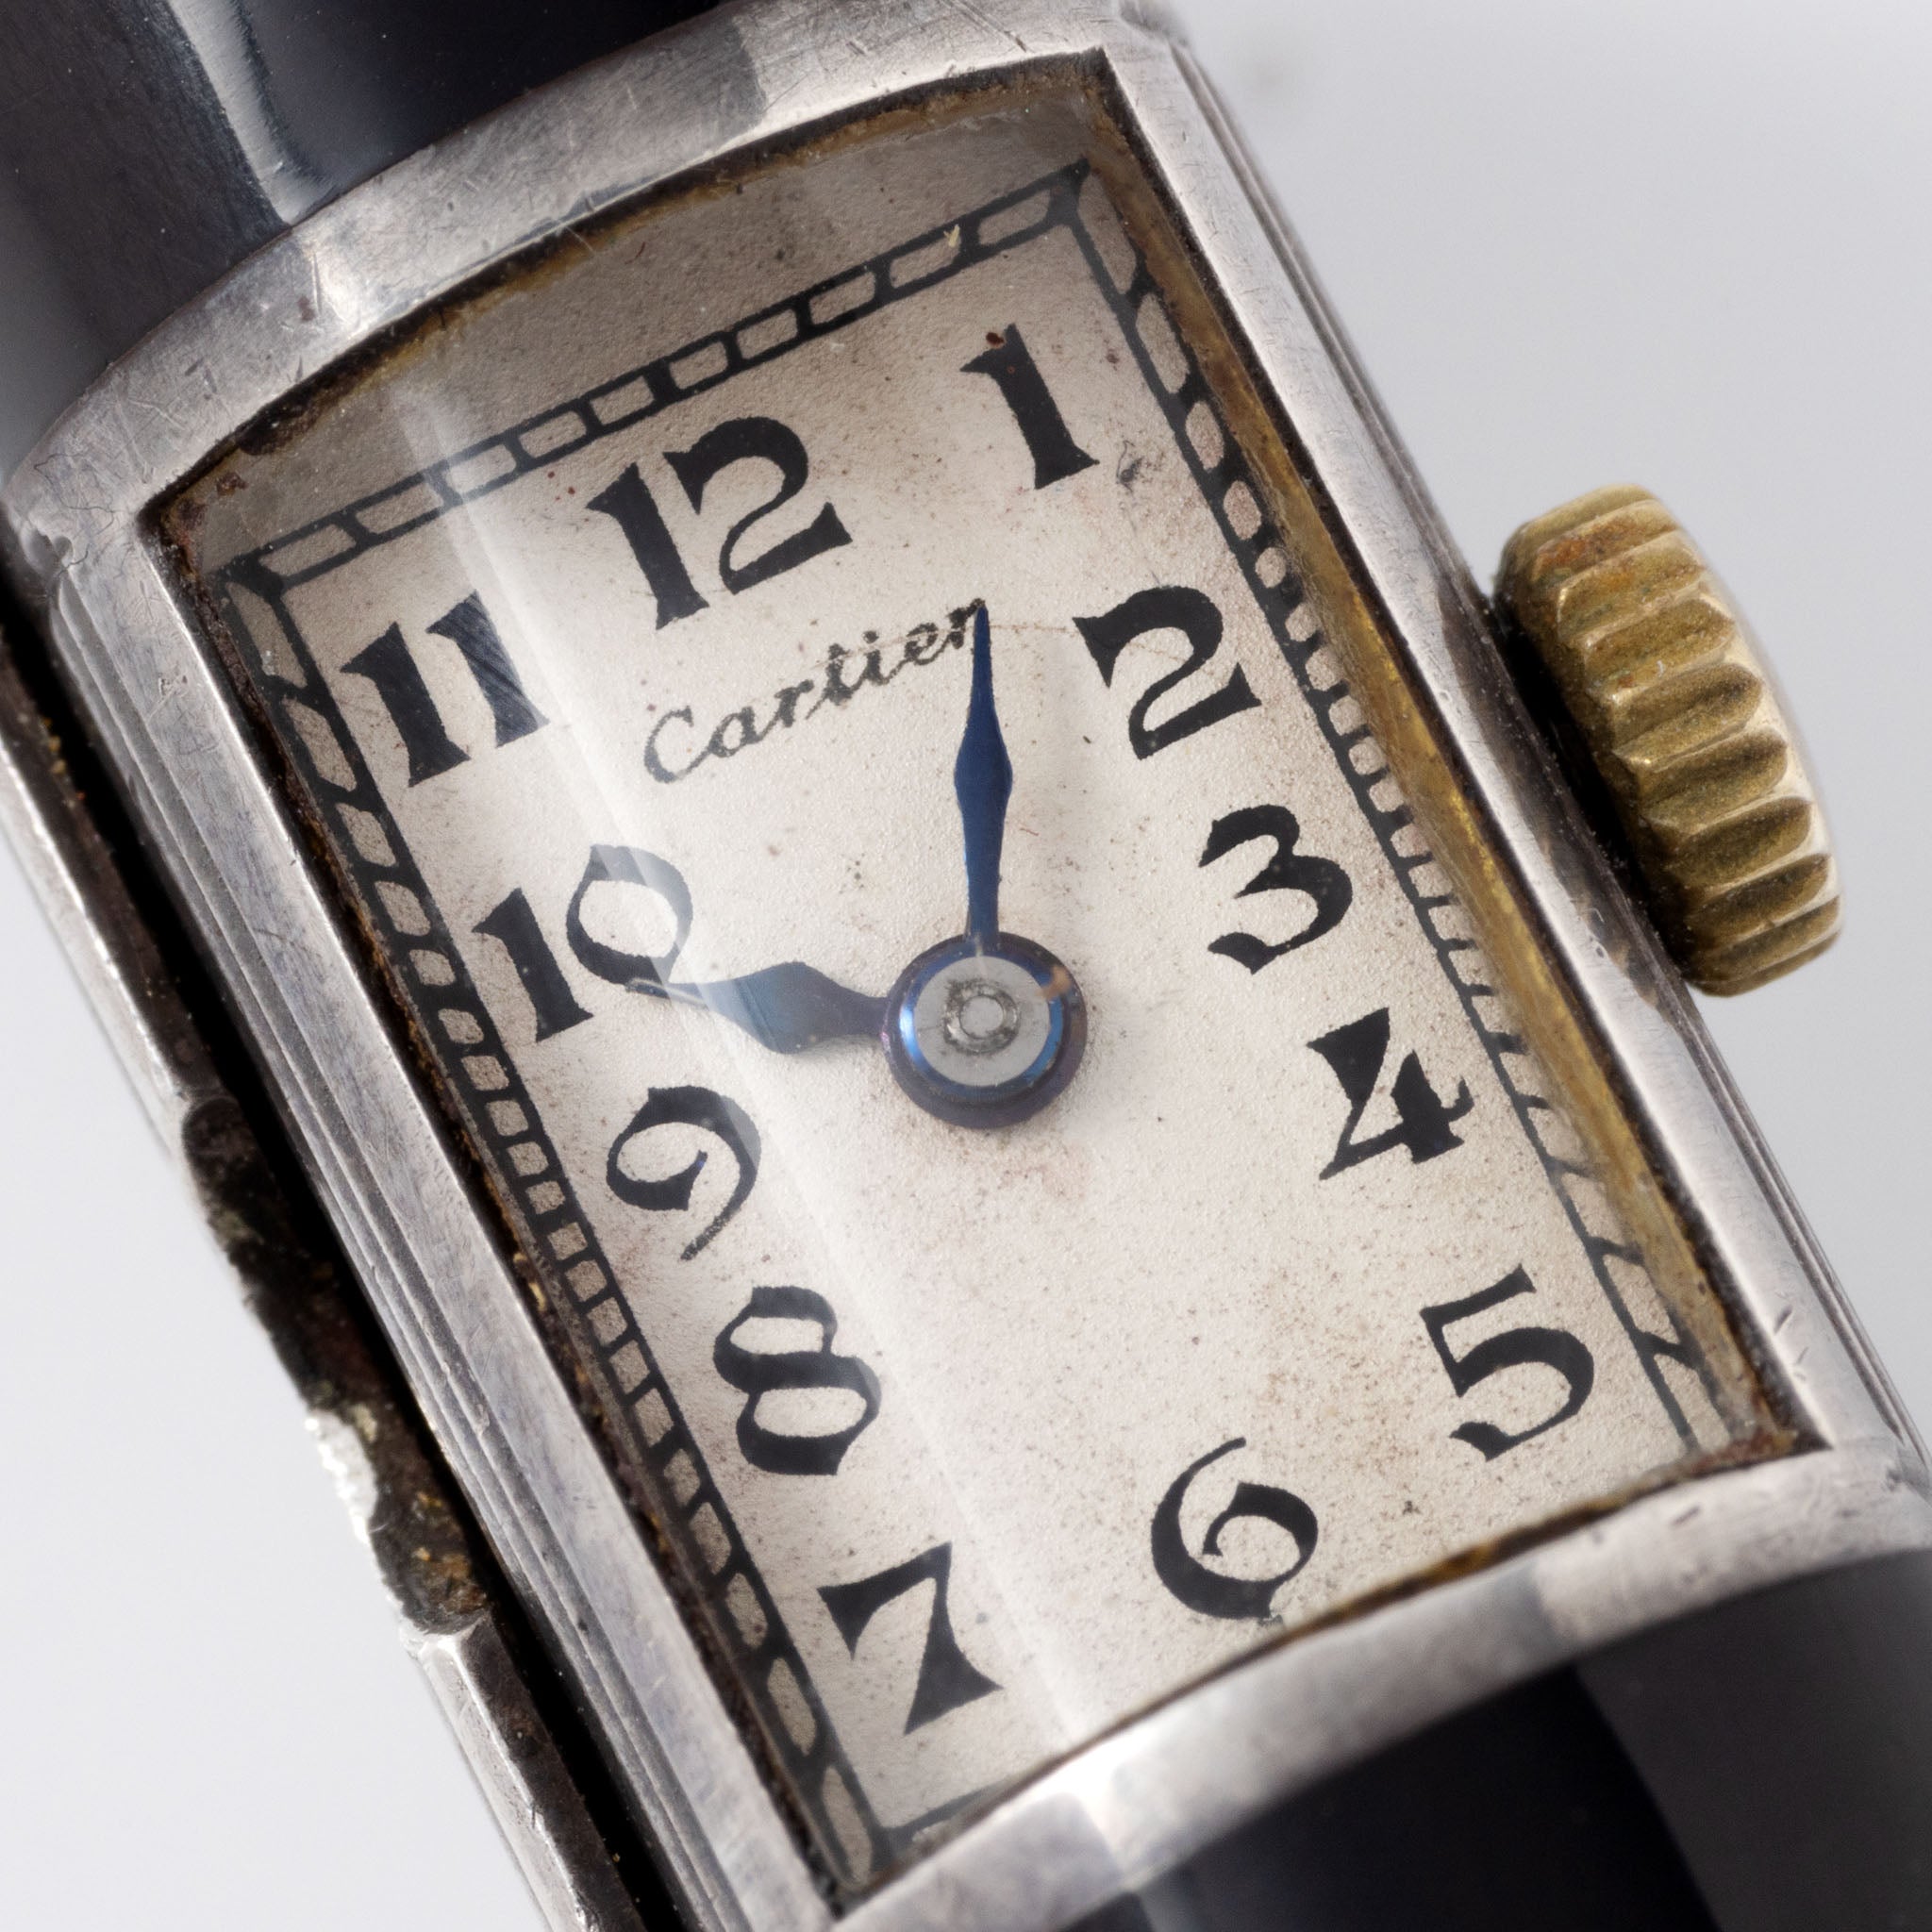 Cartier Art Deco Pencil Watch with Concealed Lighter Sterling Silver